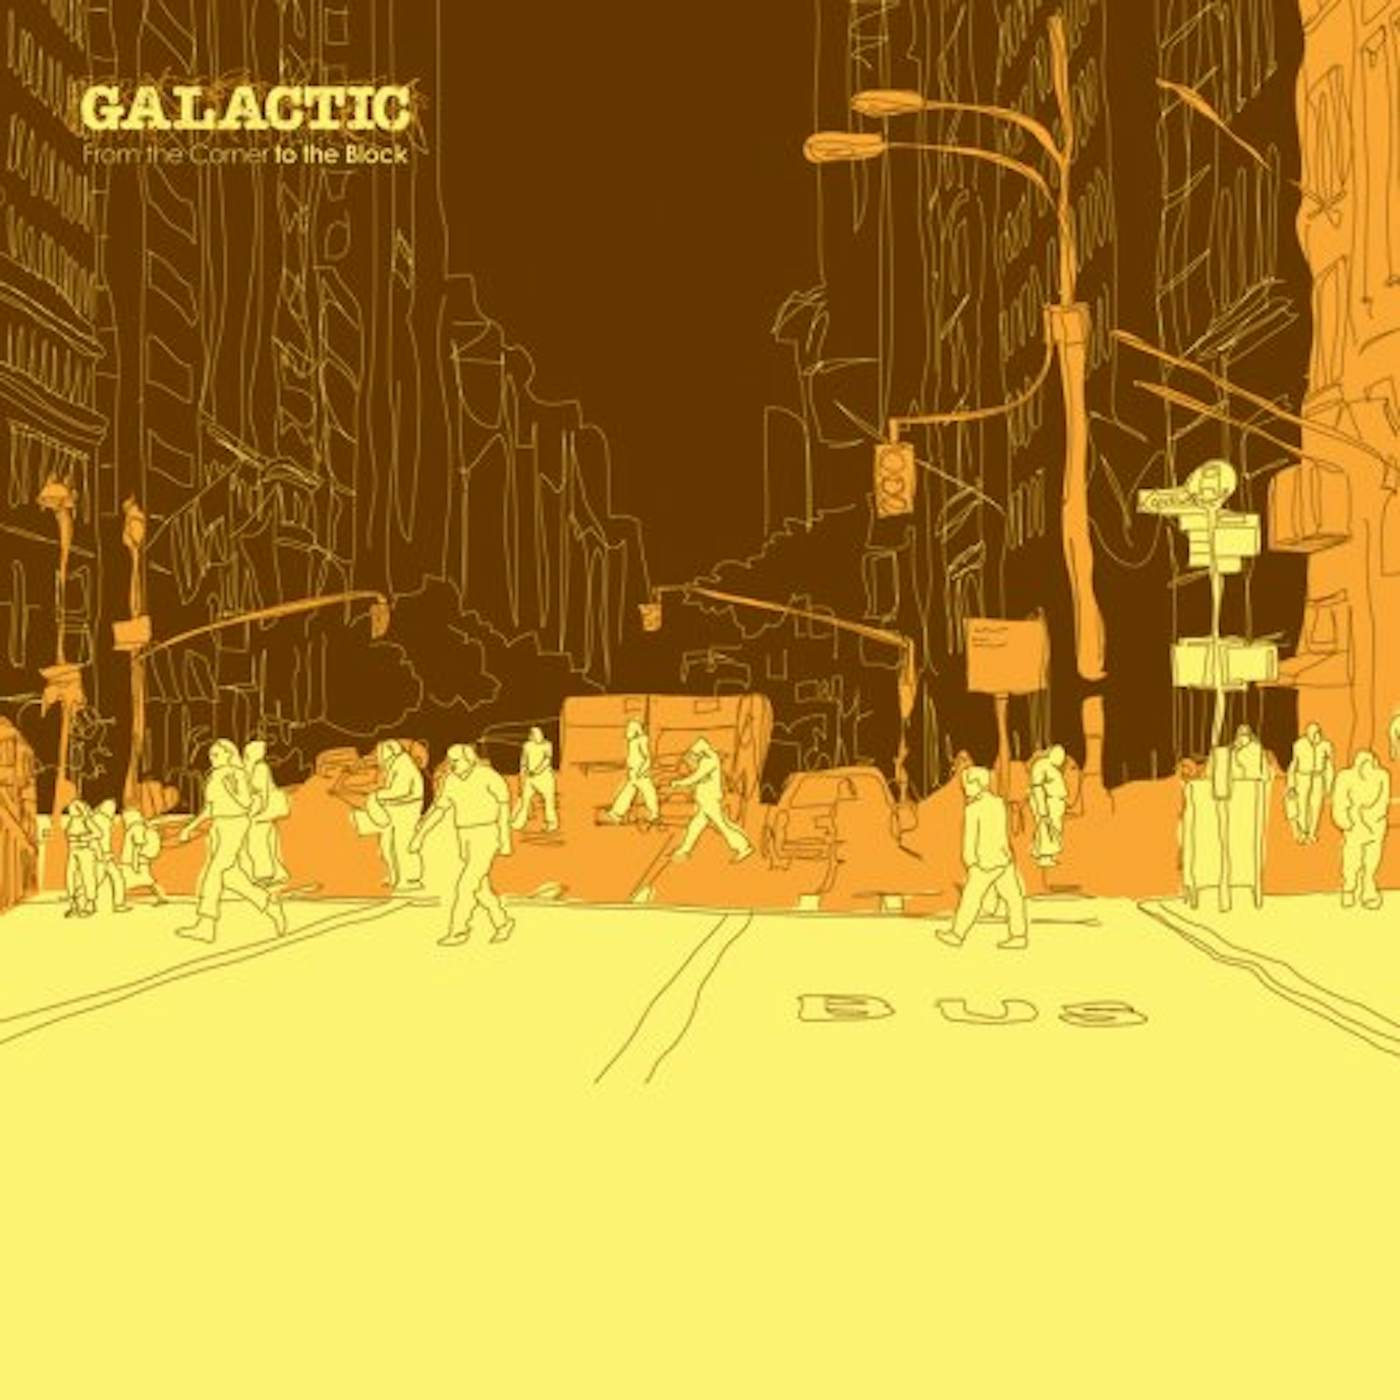 Galactic FROM THE CORNER TO THE BLOCK CD